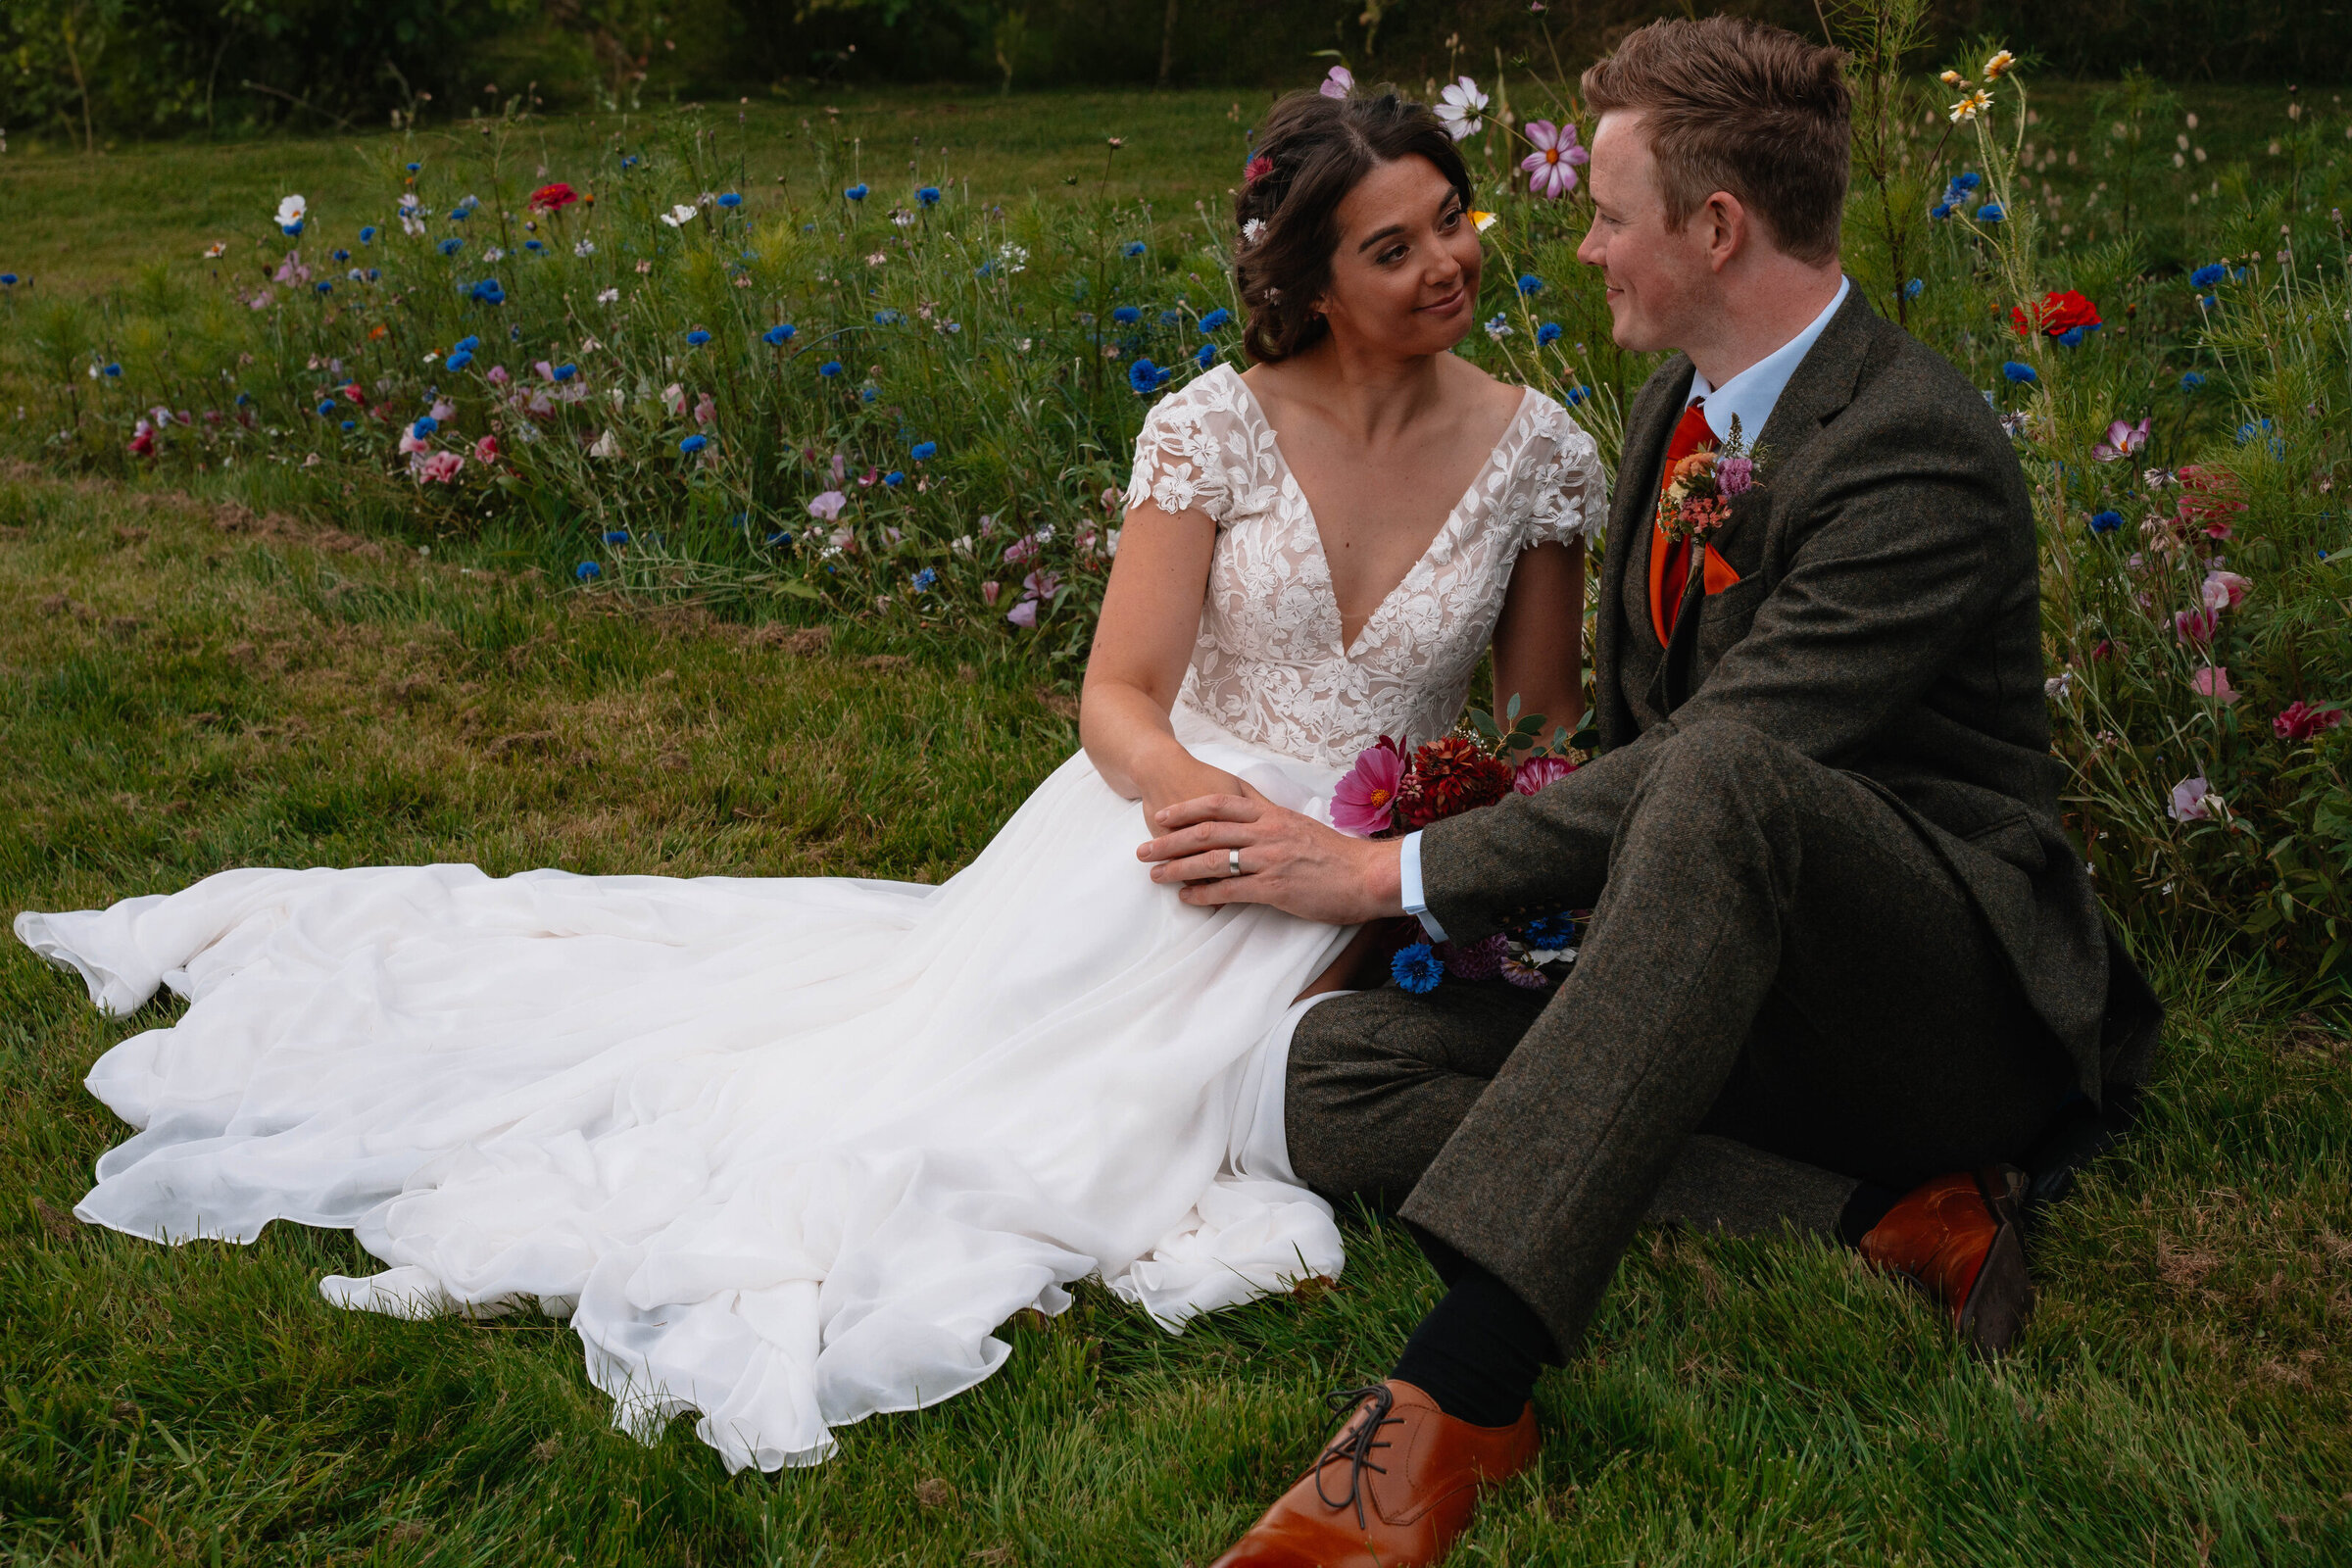 Bride and Groom in wedding attire seated close together on the grass with wildflowers in the background